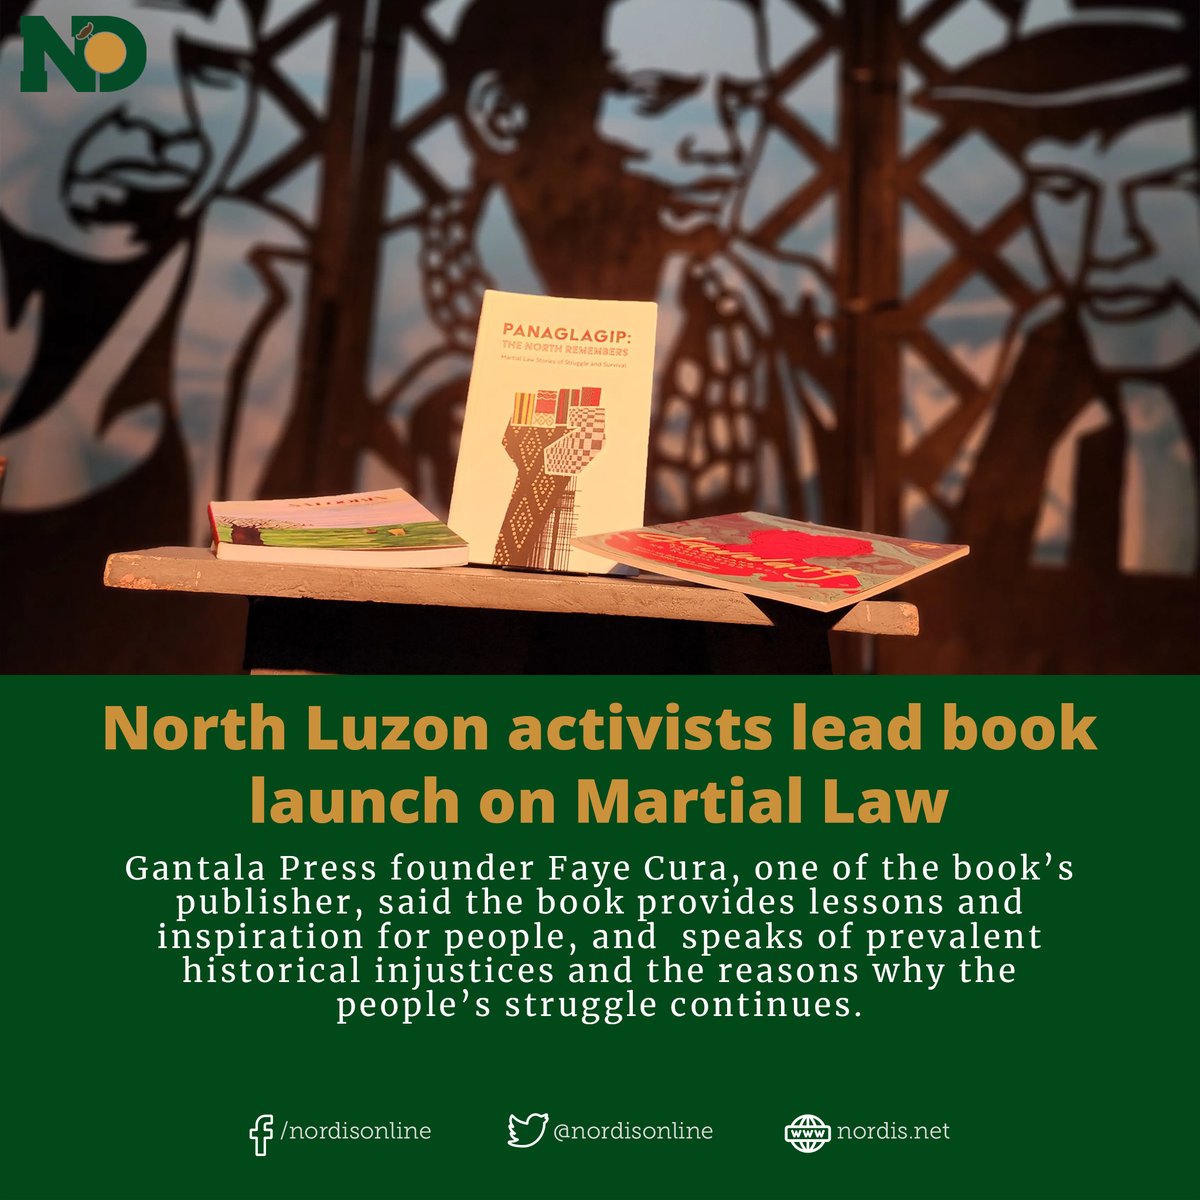 NEWS | Panaglagip: The North Remembers, a collection of stories, articles, and poems written by activists in Northern Luzon during the Marcos dictatorship, is the 'first account of Martial Law from the North,' said co-editor Joanna Carño. Read: tinyurl.com/2efr523w